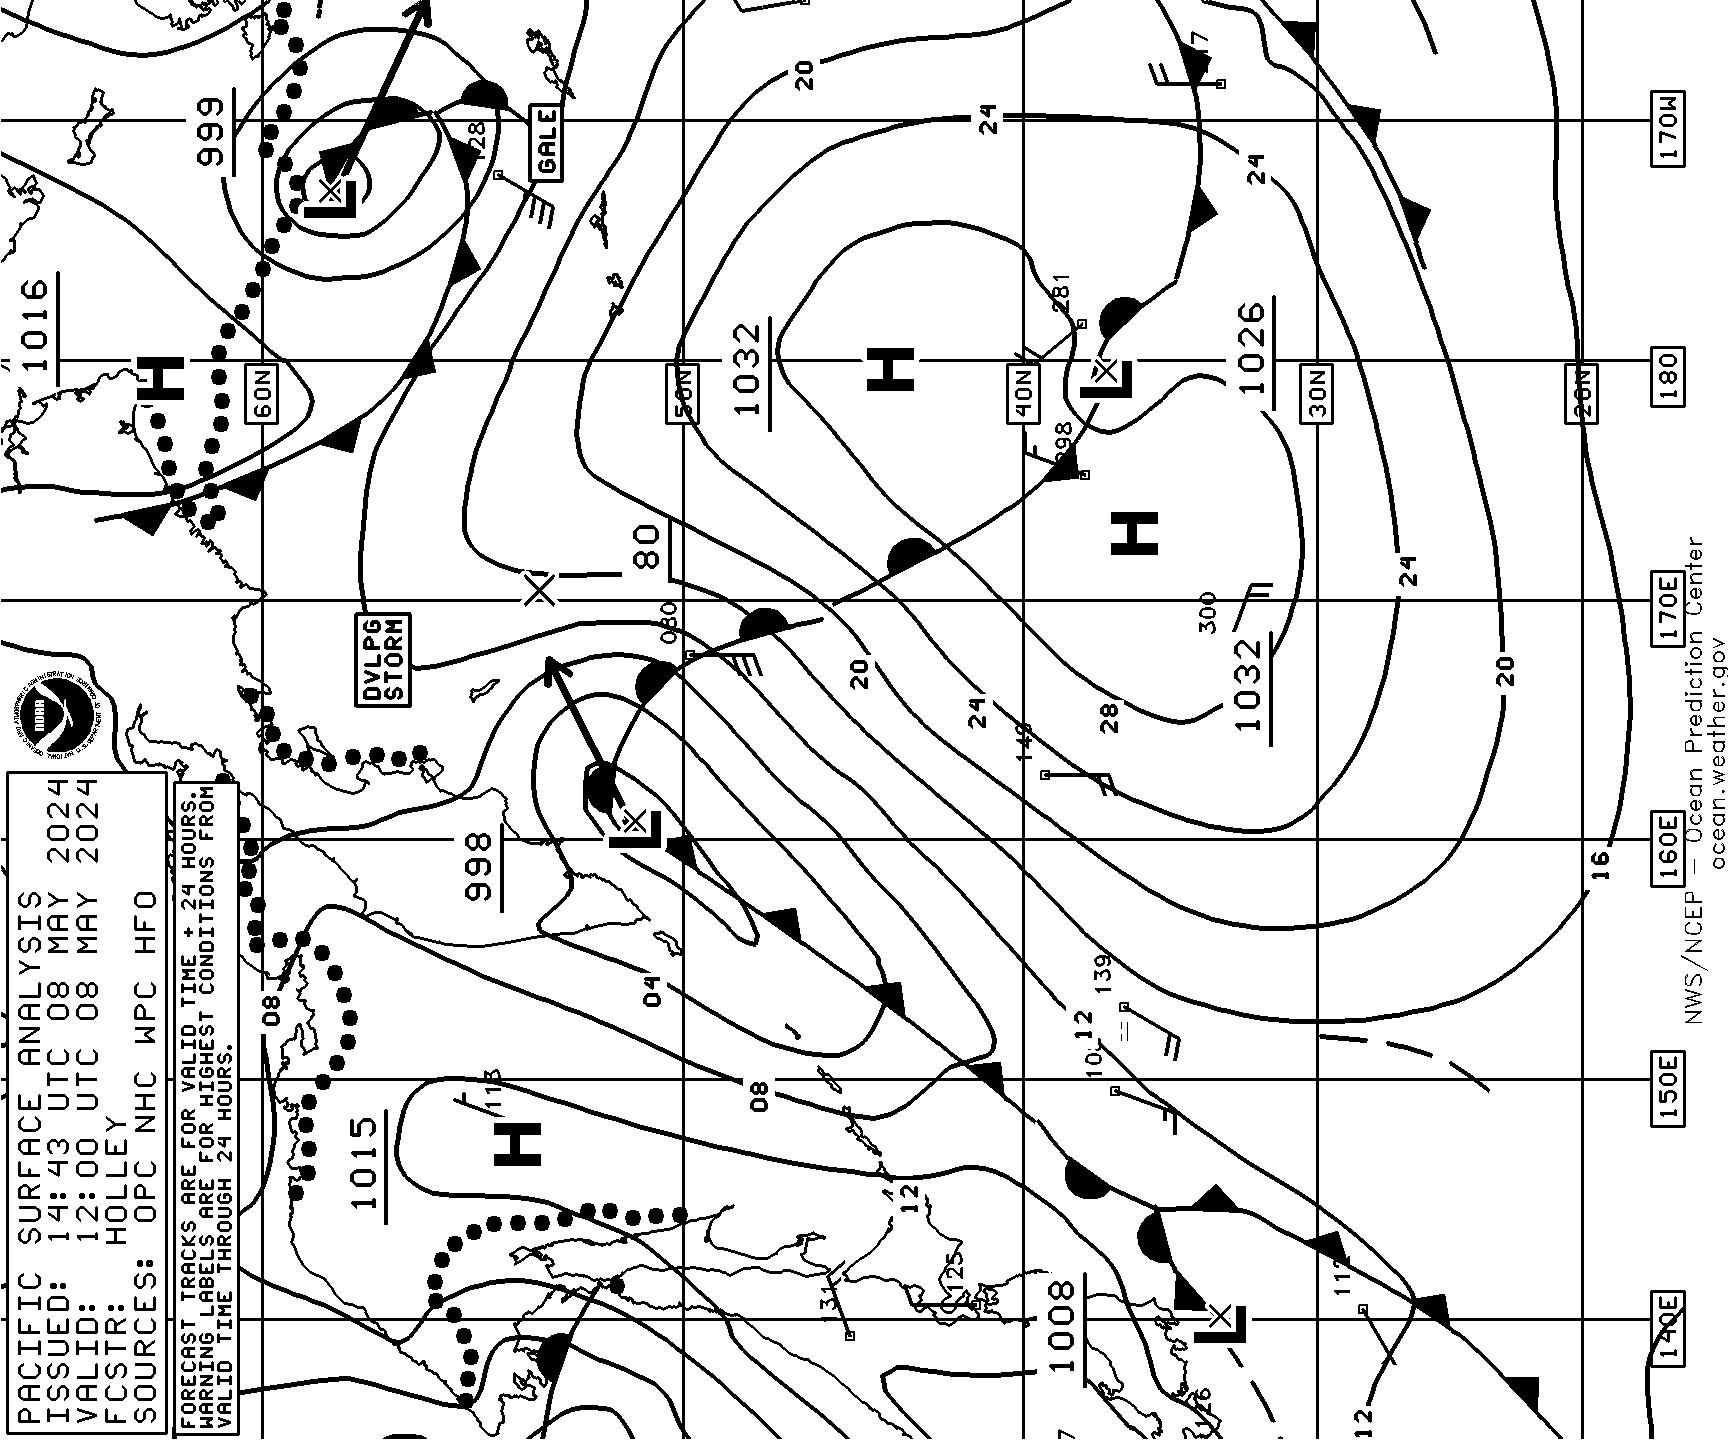 West Pacific surface analysis 